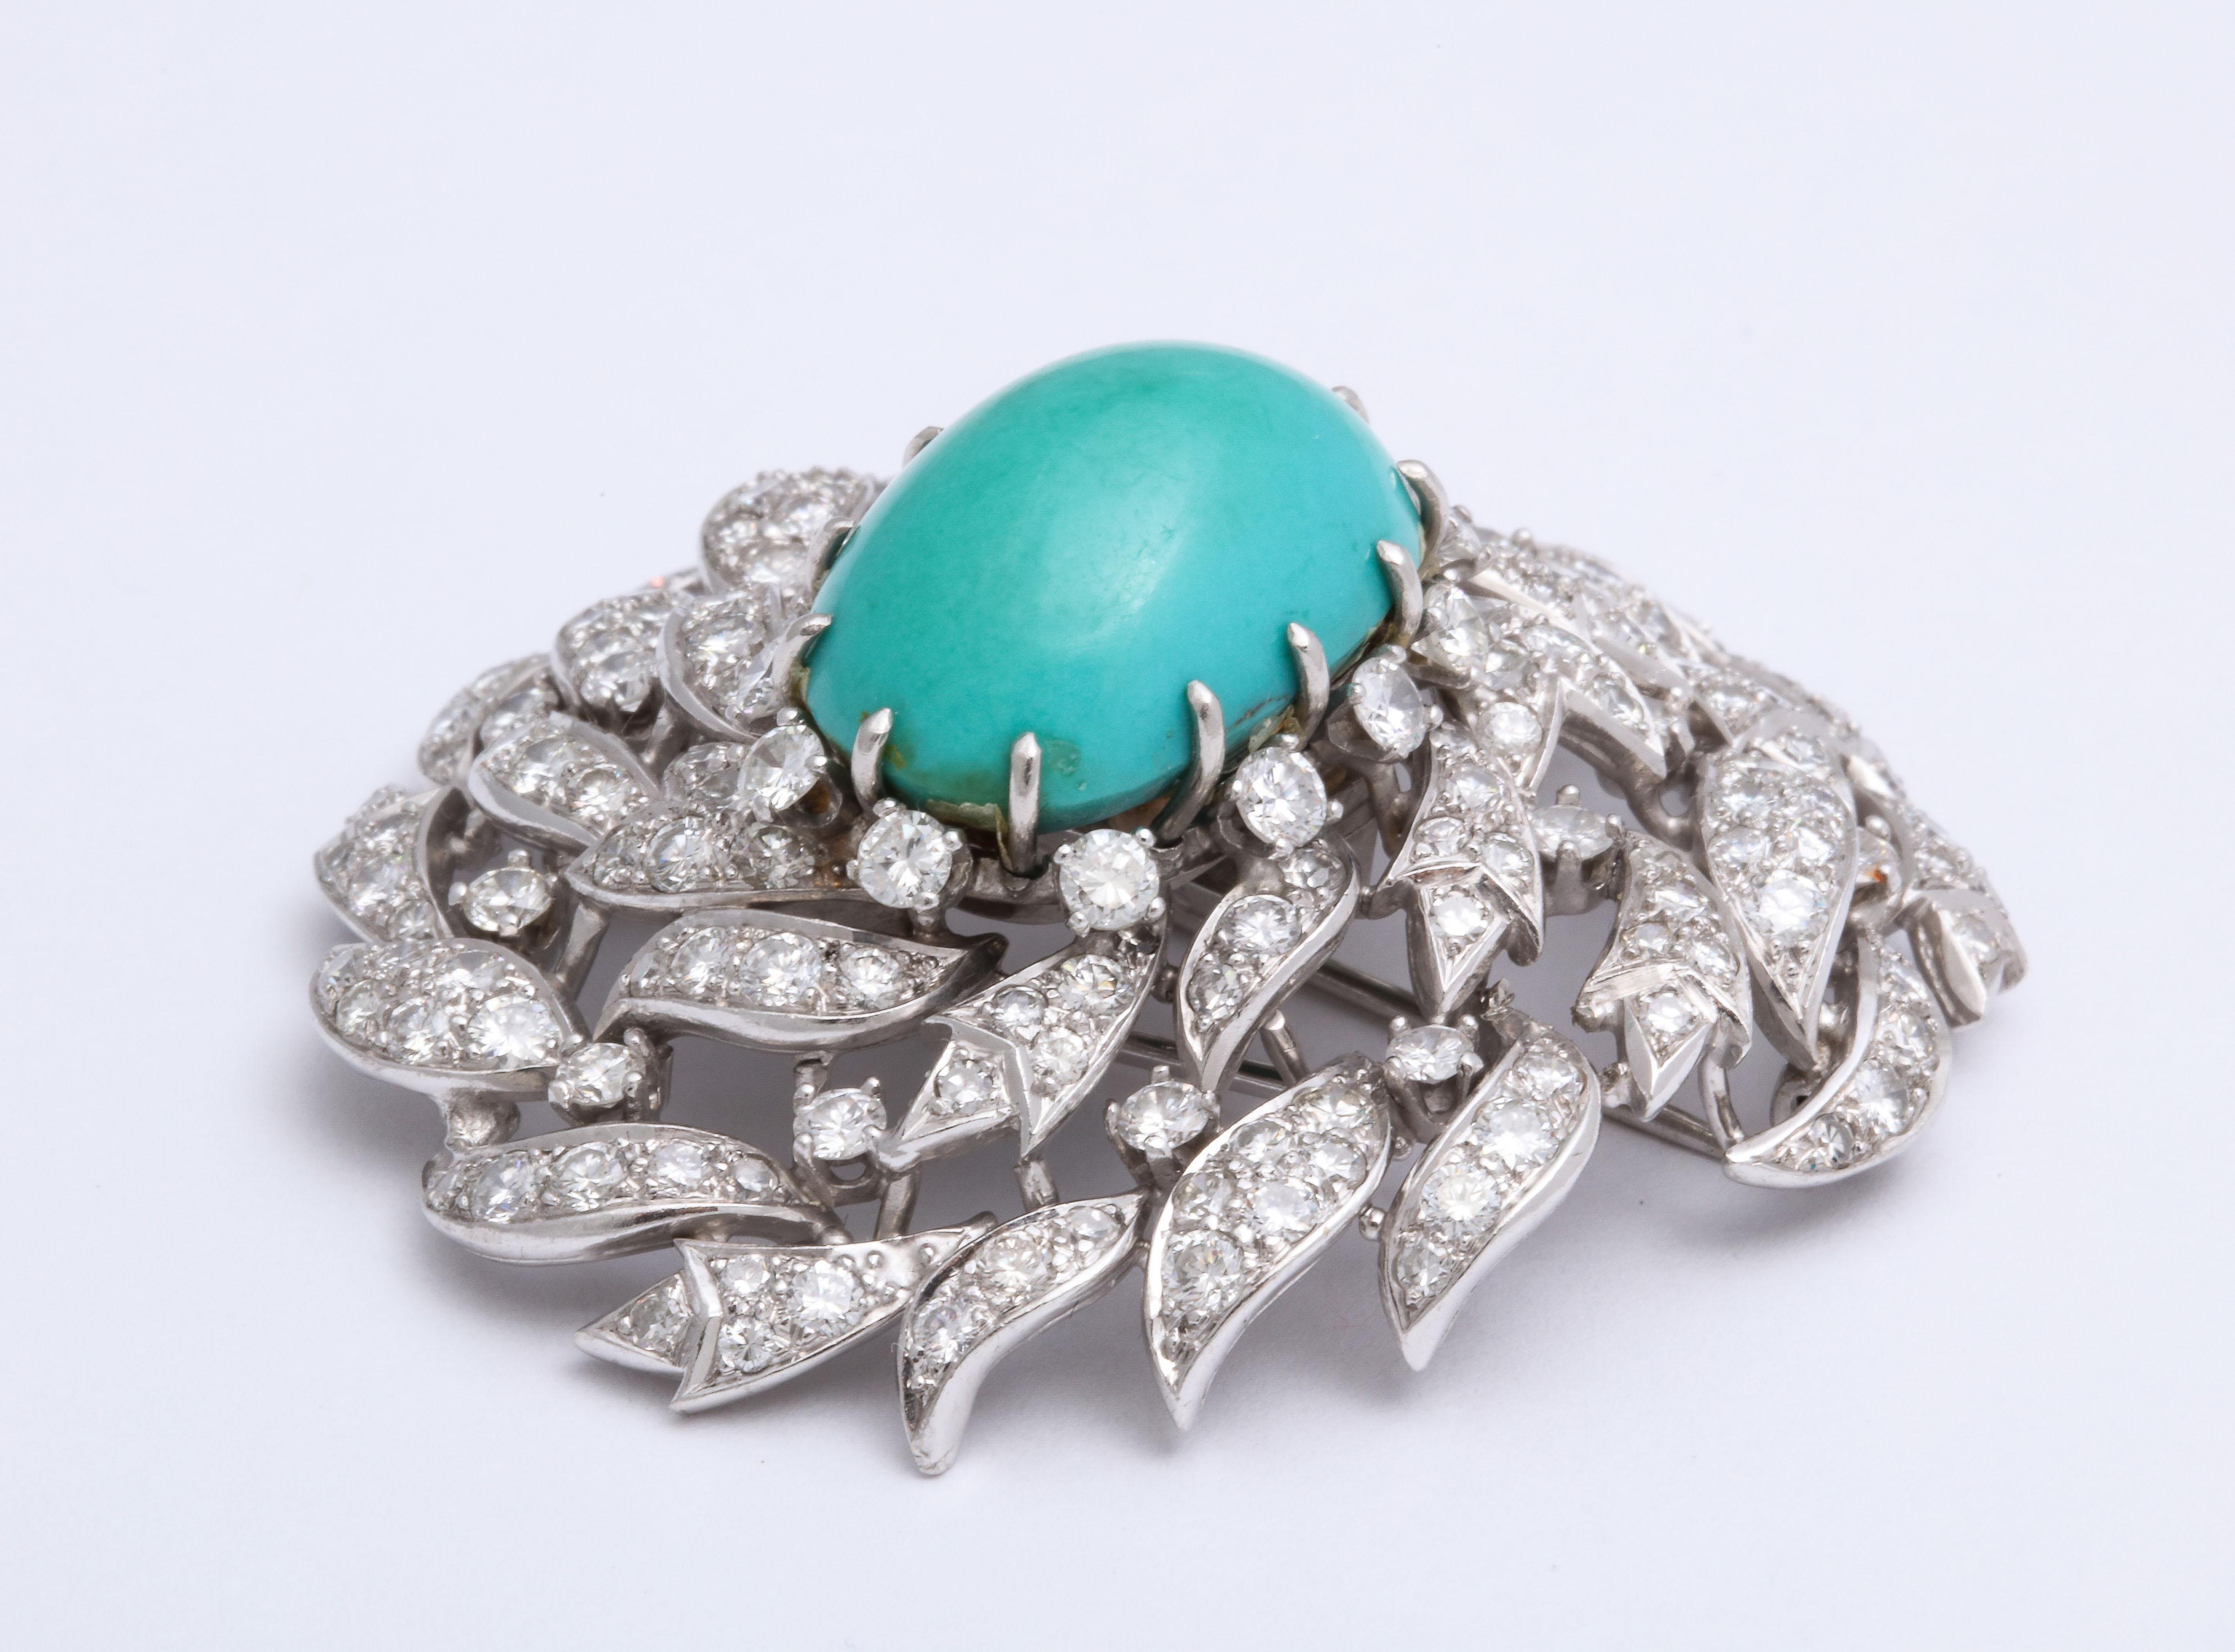 Ravishing  assymetric Persian Turquoise & Diamond Brooch resembling a Peacock's Eye.  Prong set  & pave stones set in Platinum.
Height of opulence and excess!  Ca 1940/50  Scads of Diamonds.  Two Prong clip attachment Over 6 carats

